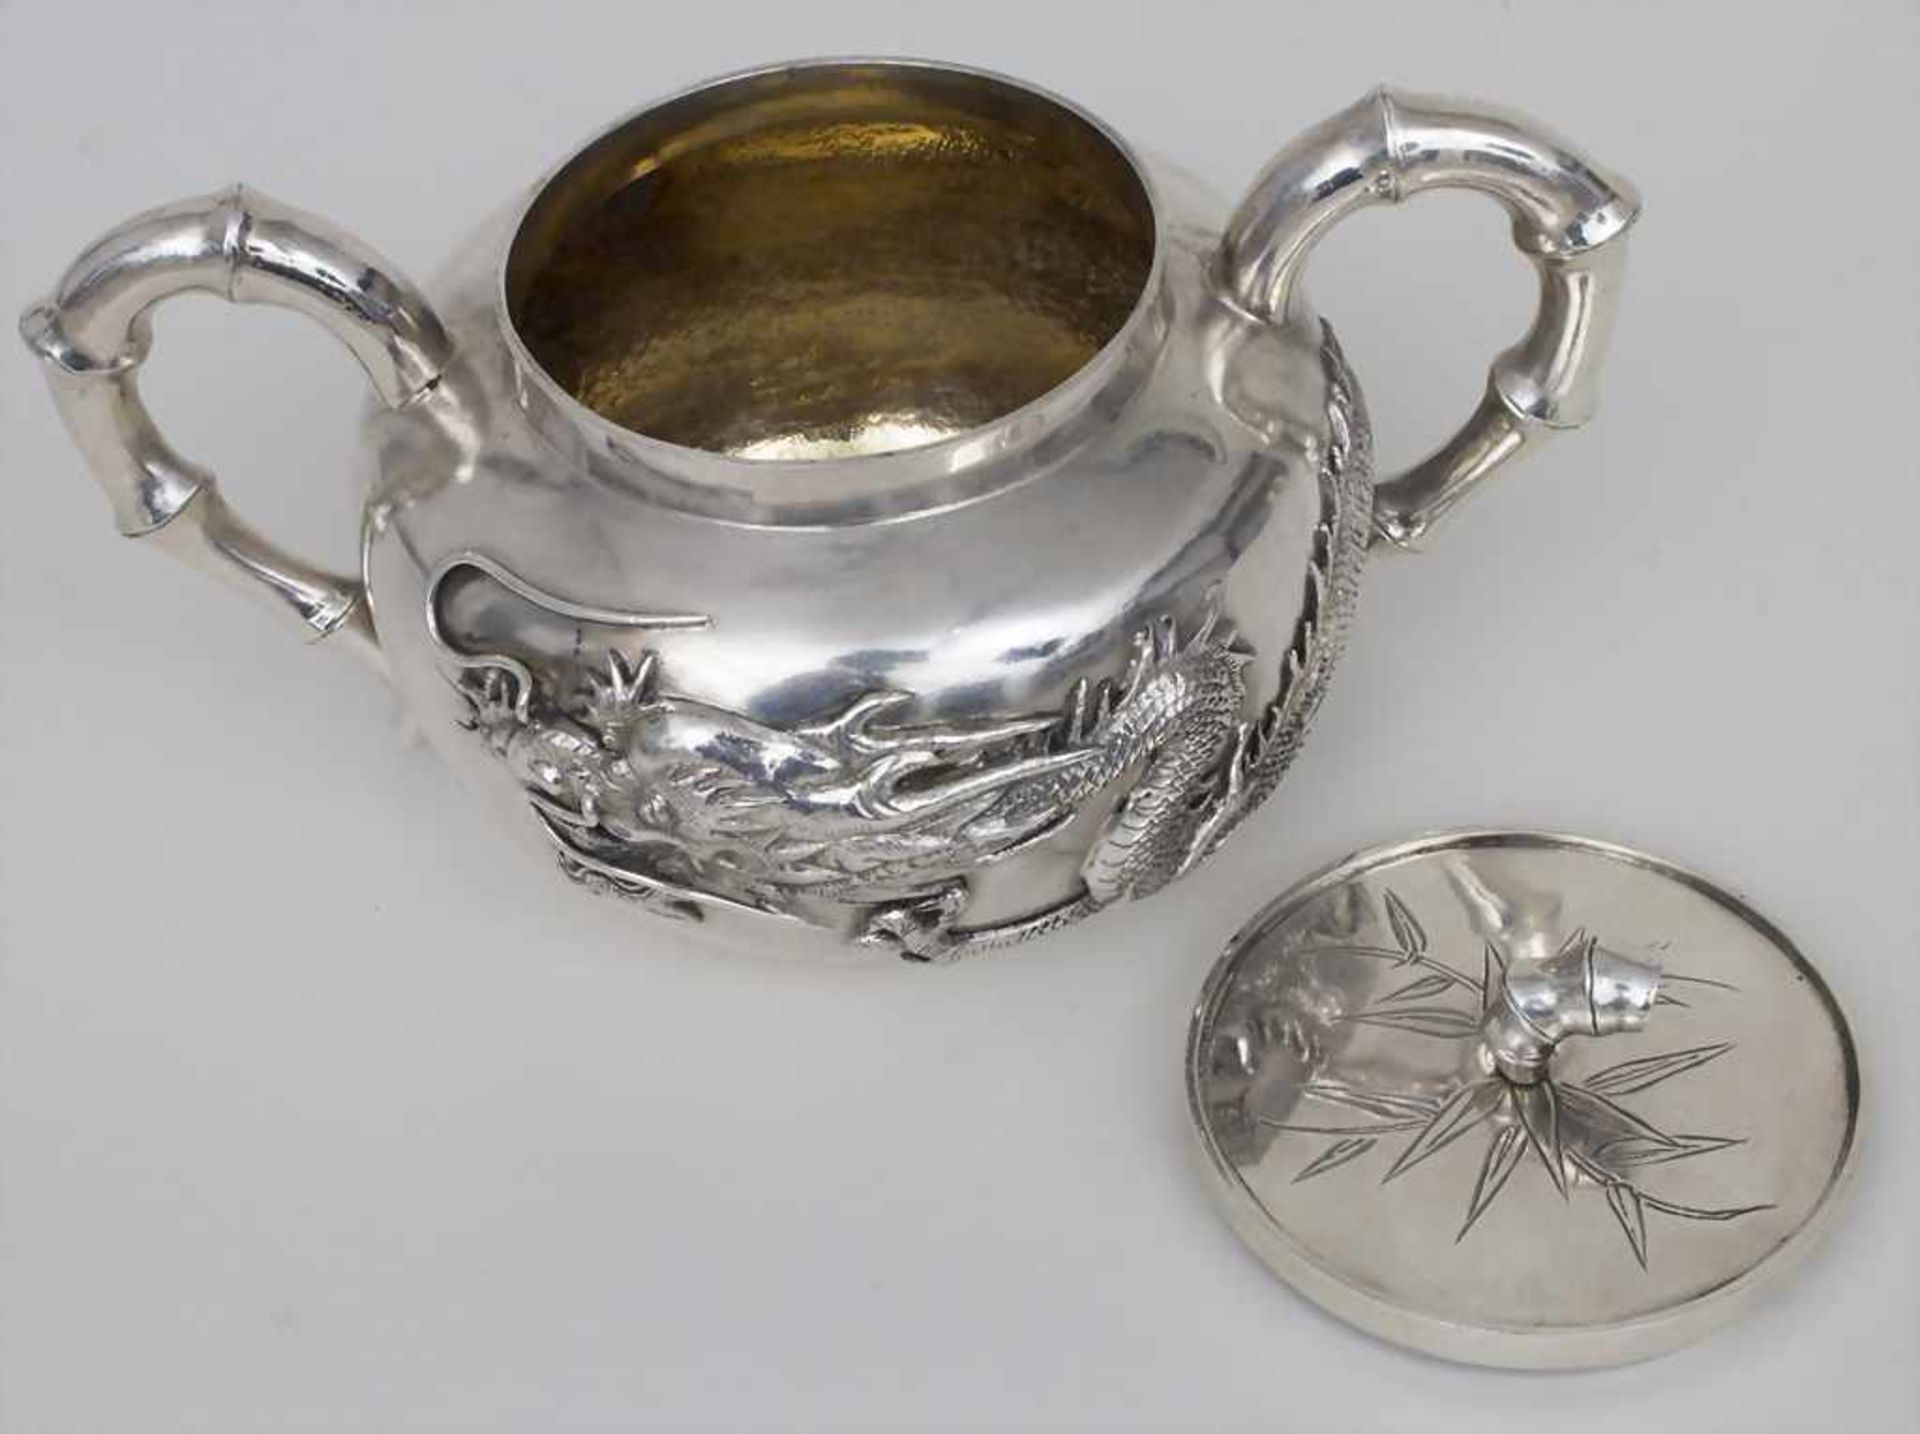 Zuckerdose mit Drachen / A Chinese export silver sugar bowl with a dragon, Wing Nam & Co. (1875- - Image 4 of 6